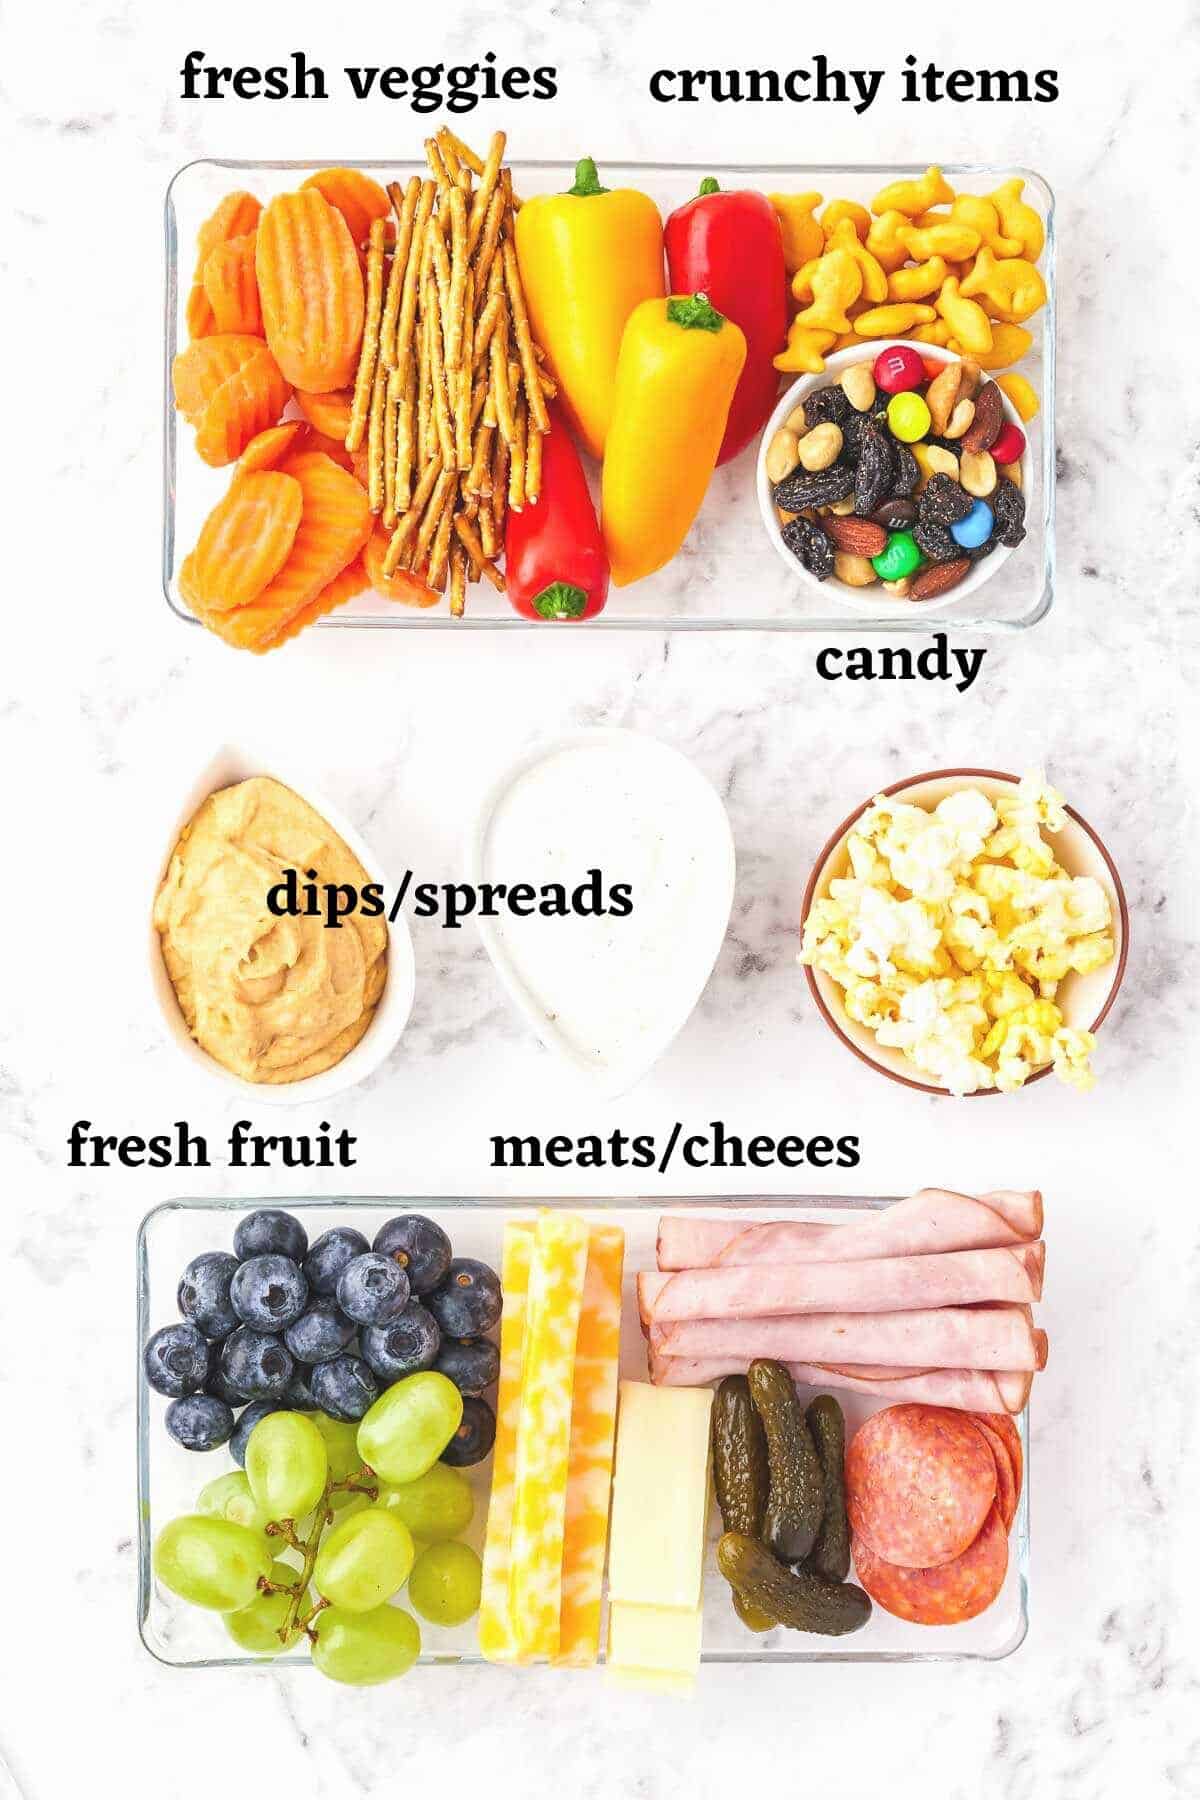 https://getonmyplate.com/wp-content/uploads/2022/12/ingredients-needed-for-kid-charcuterie-board-1200x1800.jpg